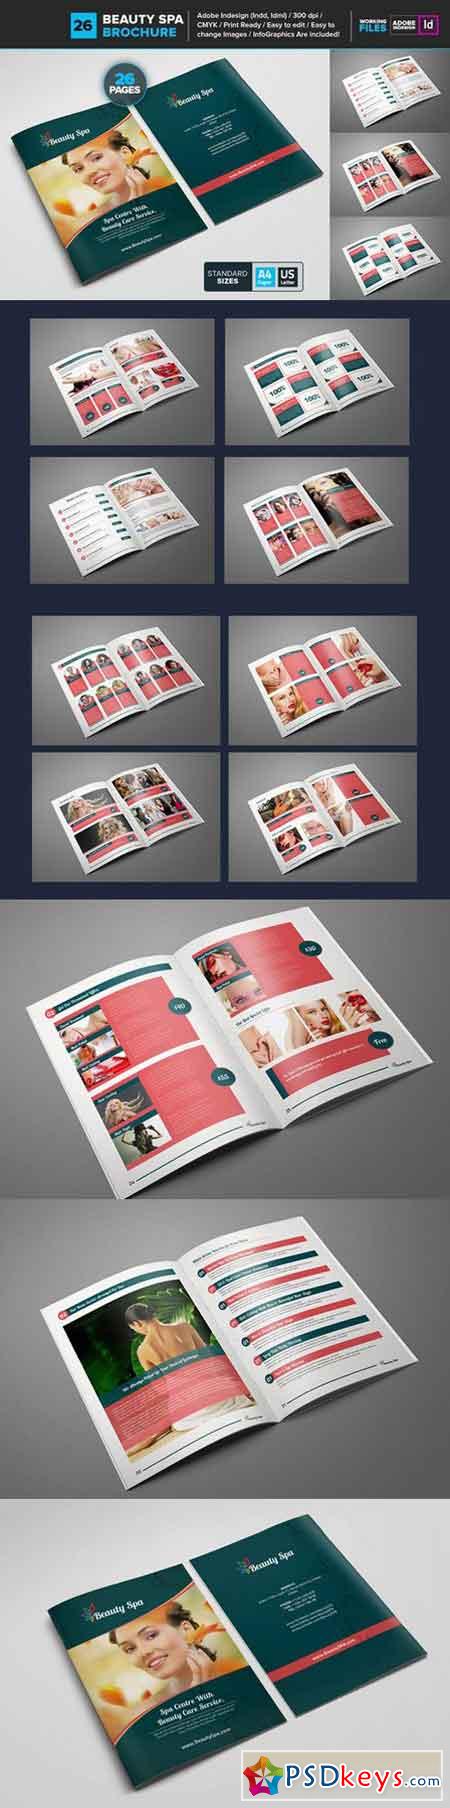 Beauty Spa Booklet Template 26 685790